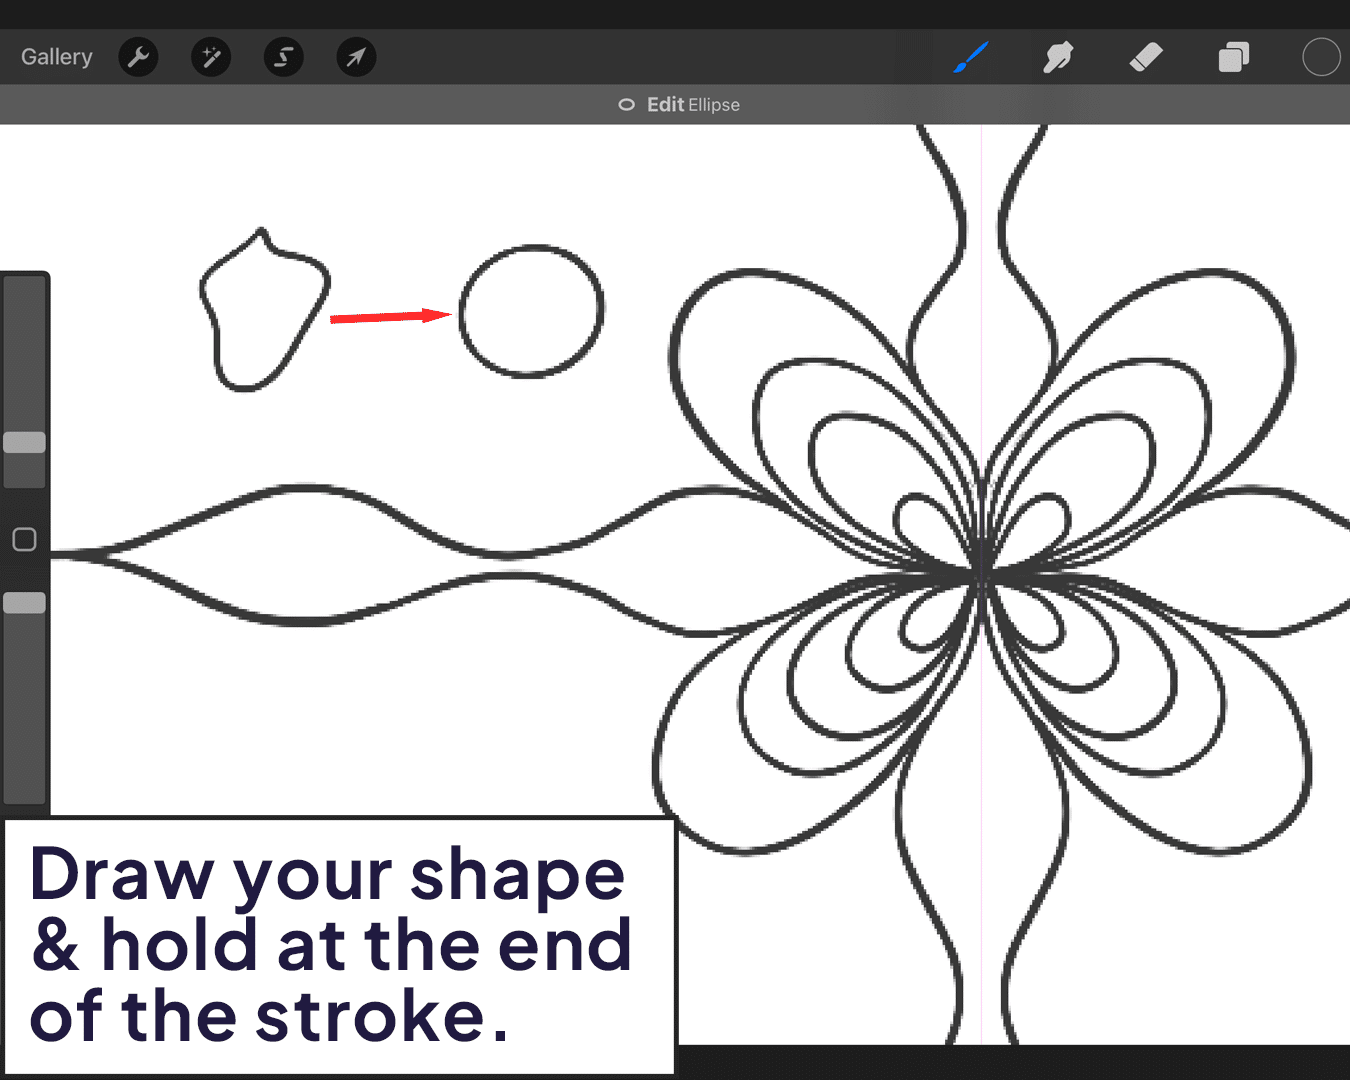 Drawing your shape